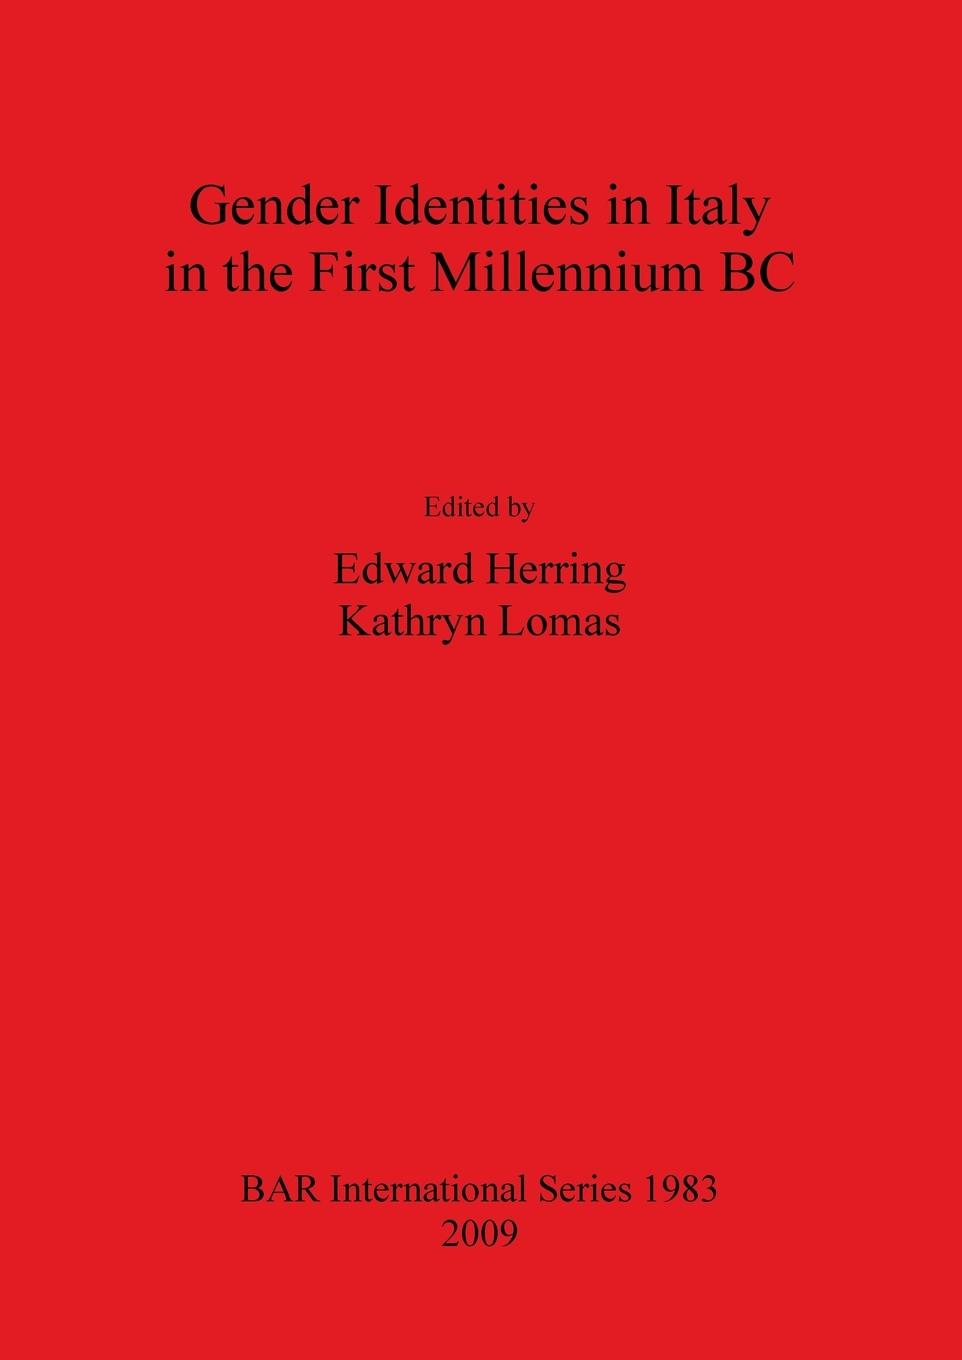 Gender Identities in Italy in the First Millennium BC - Herring, Edward Lomas, Kathryn